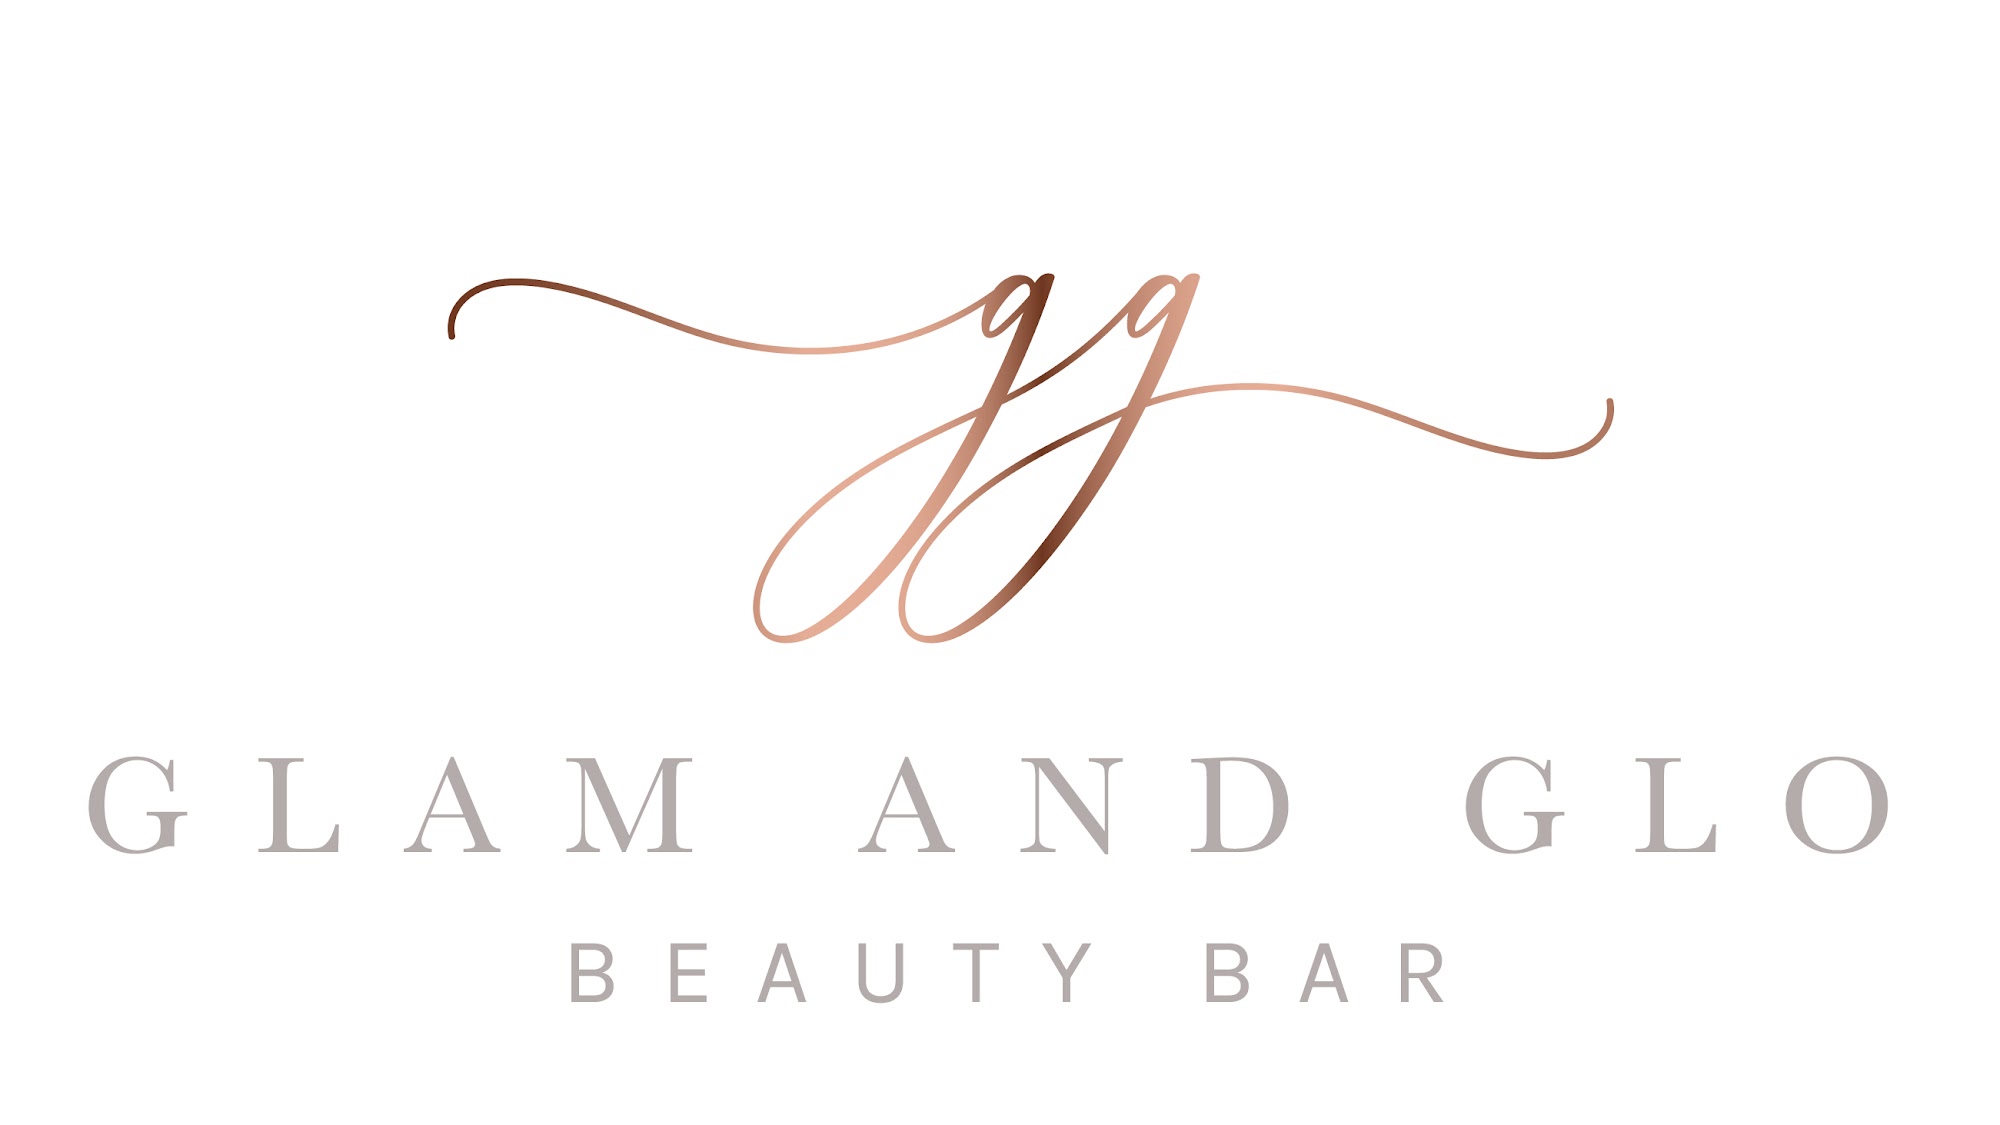 Glam and Glo Beauty Bar